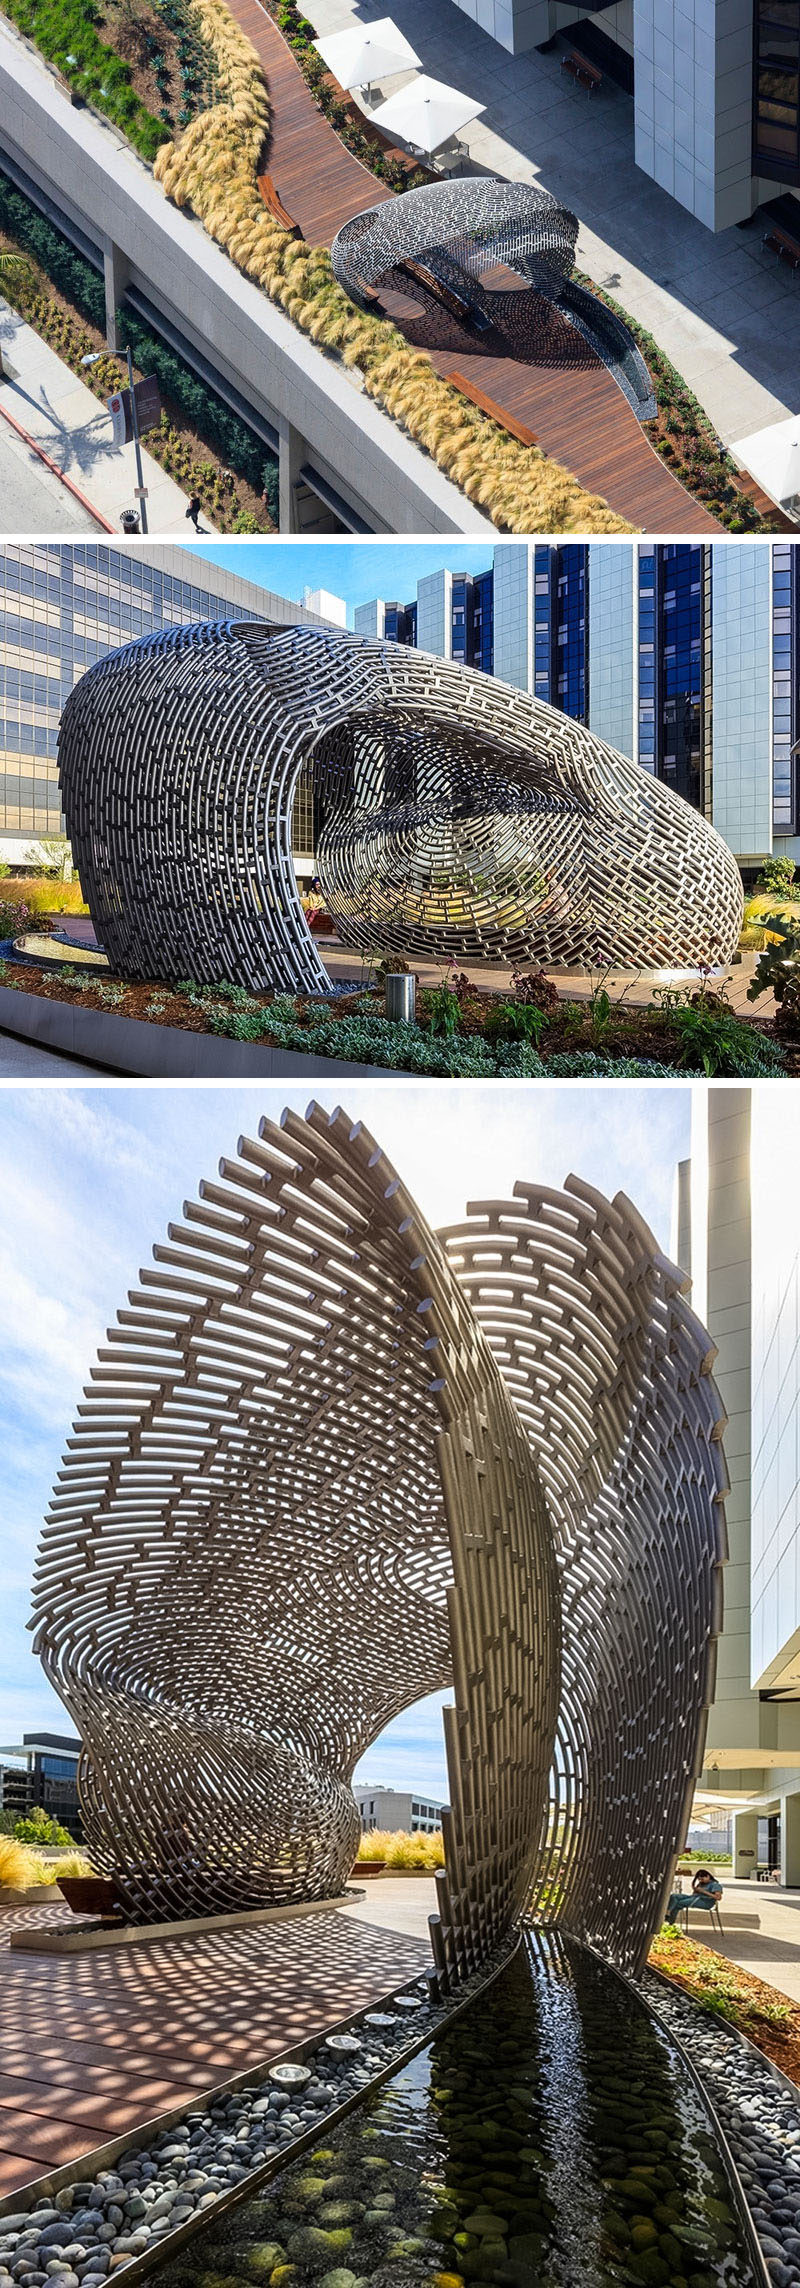 This modern sculptural pavilion by Ball Nogues Studio, is fabricated from 2793 linear feet of 2-inch diameter mild steel tube that were bent with a computer numerically controlled rolling system. In total, there are 352 individual tubes that are unique in their design and together they form a structural shell.